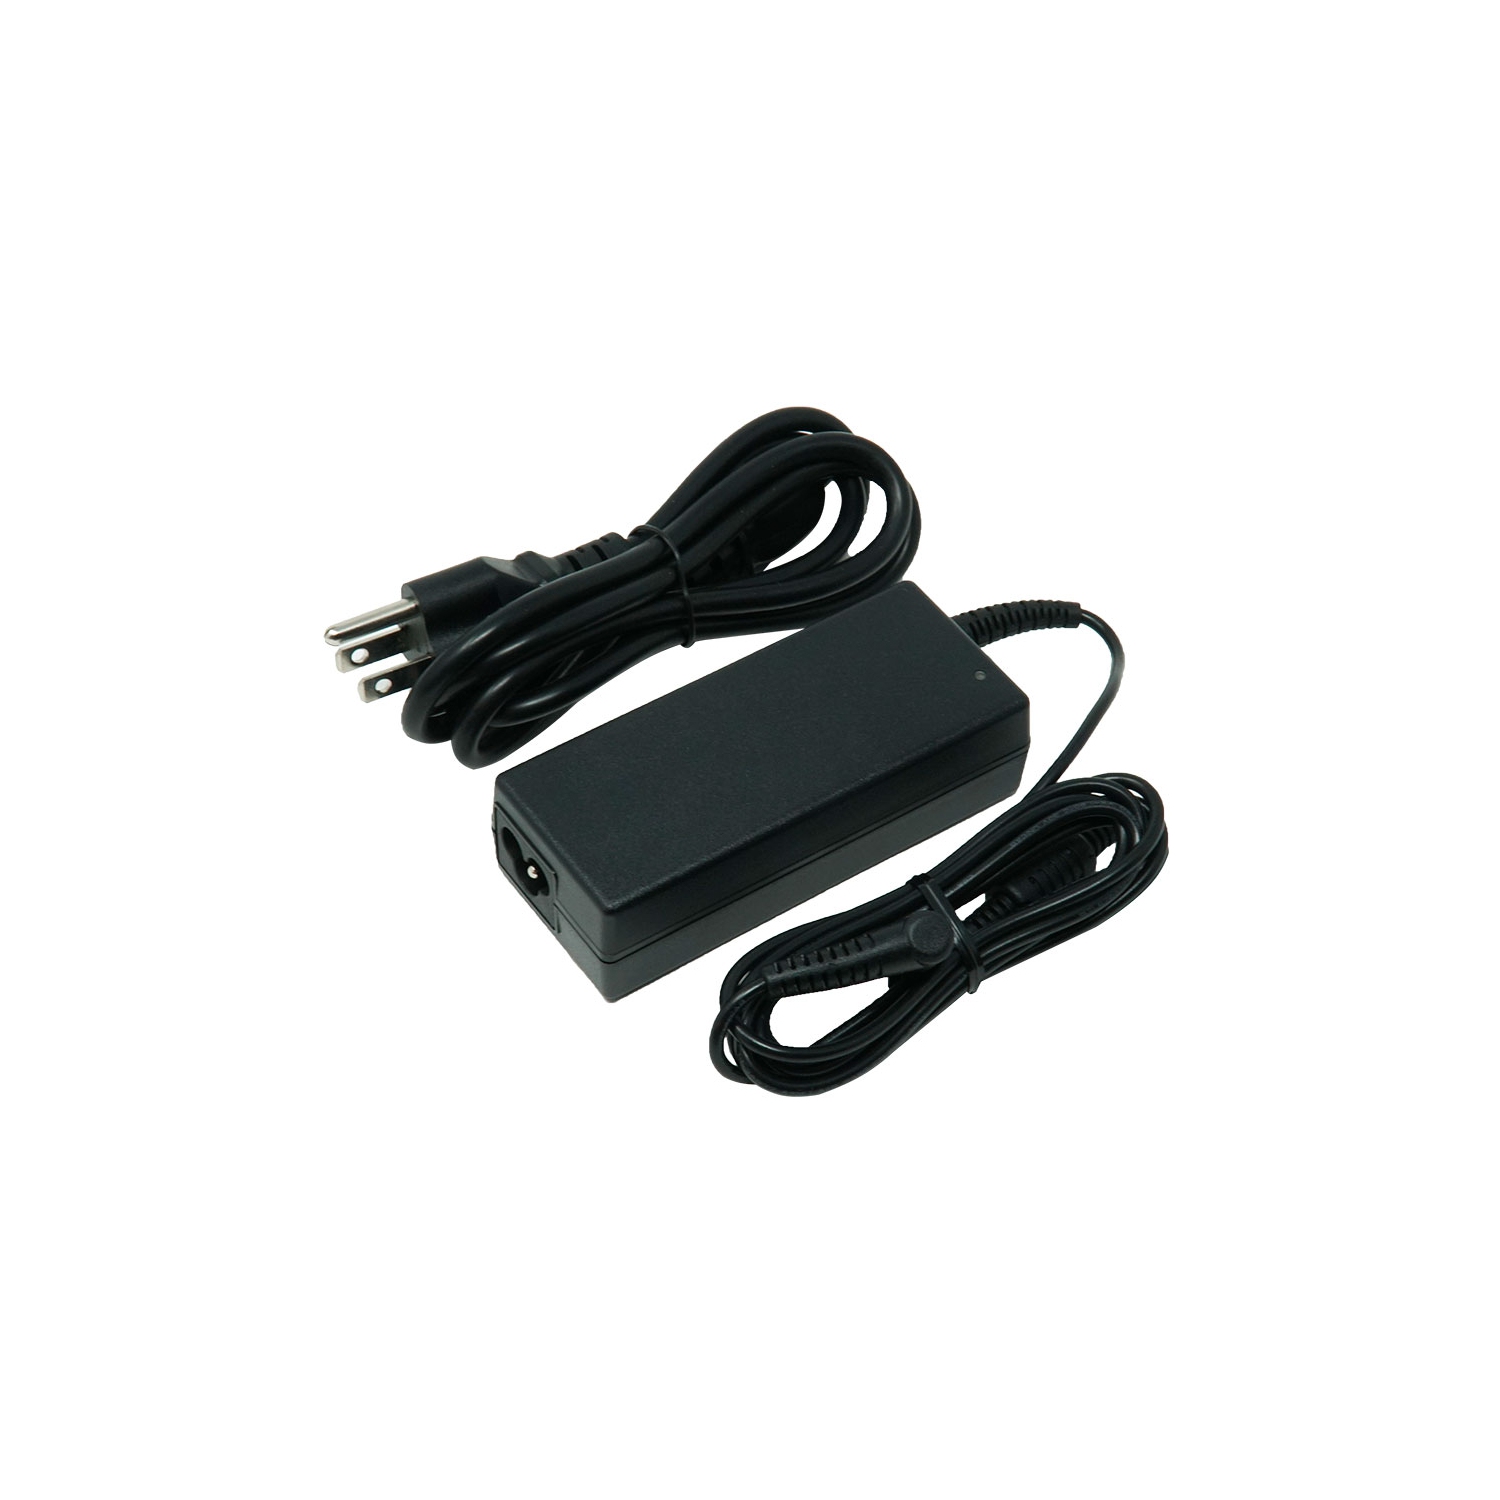 Dr. Battery - Notebook Adapter for Fujitsu LifeBook LH532 / 177625-001 / 177626001 / 180676001 / 222113001 - Free Shipping